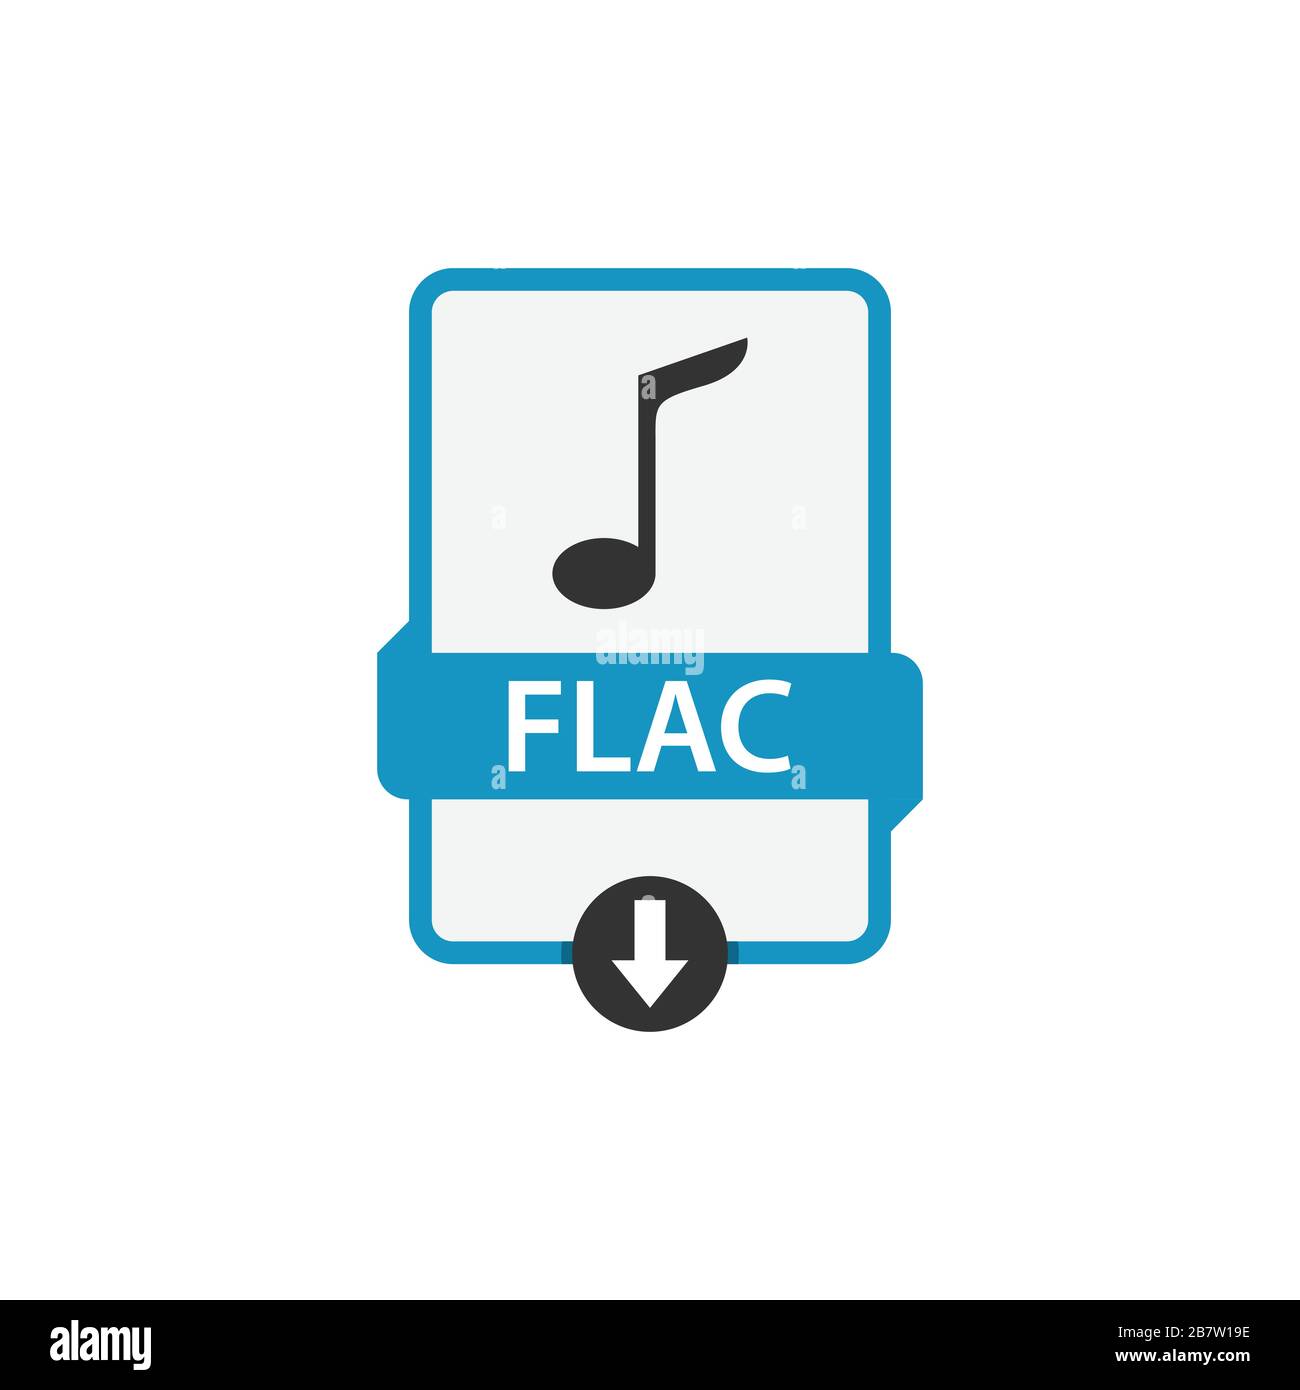 Flac download audio file format vector image. Flac file icon flat design graphic audio vector Stock Vector